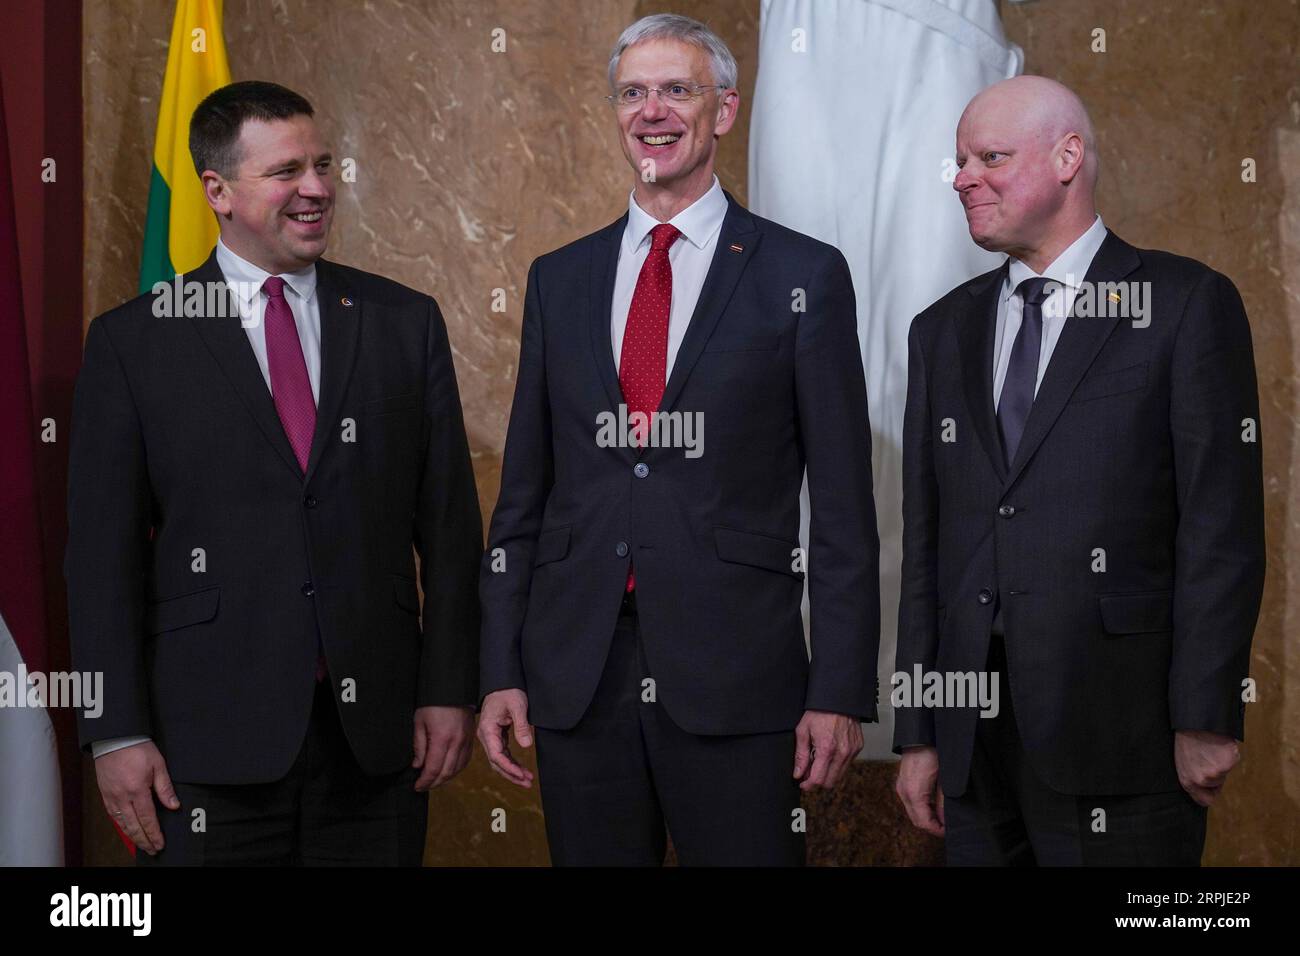 191206 -- RIGA, Dec. 6, 2019 Xinhua -- Estonian Prime Minister Juri Ratas, Latvian Prime Minister Krisjanis Karins, and Lithuanian Prime Minister Saulius Skvernelis from L to R pose for a photo during their meeting in Riga, Latvia, on Dec. 6, 2019. The prime ministers of the three Baltic states and Poland met here on Friday to discuss progress on the regional rail infrastructure project Rail Baltica amid concerns about delays in the project s implementation. Photo by Janis/Xinhua LATVIA-RIGA-BALTIC STATES-POLAND-PMS-MEETING PUBLICATIONxNOTxINxCHN Stock Photo